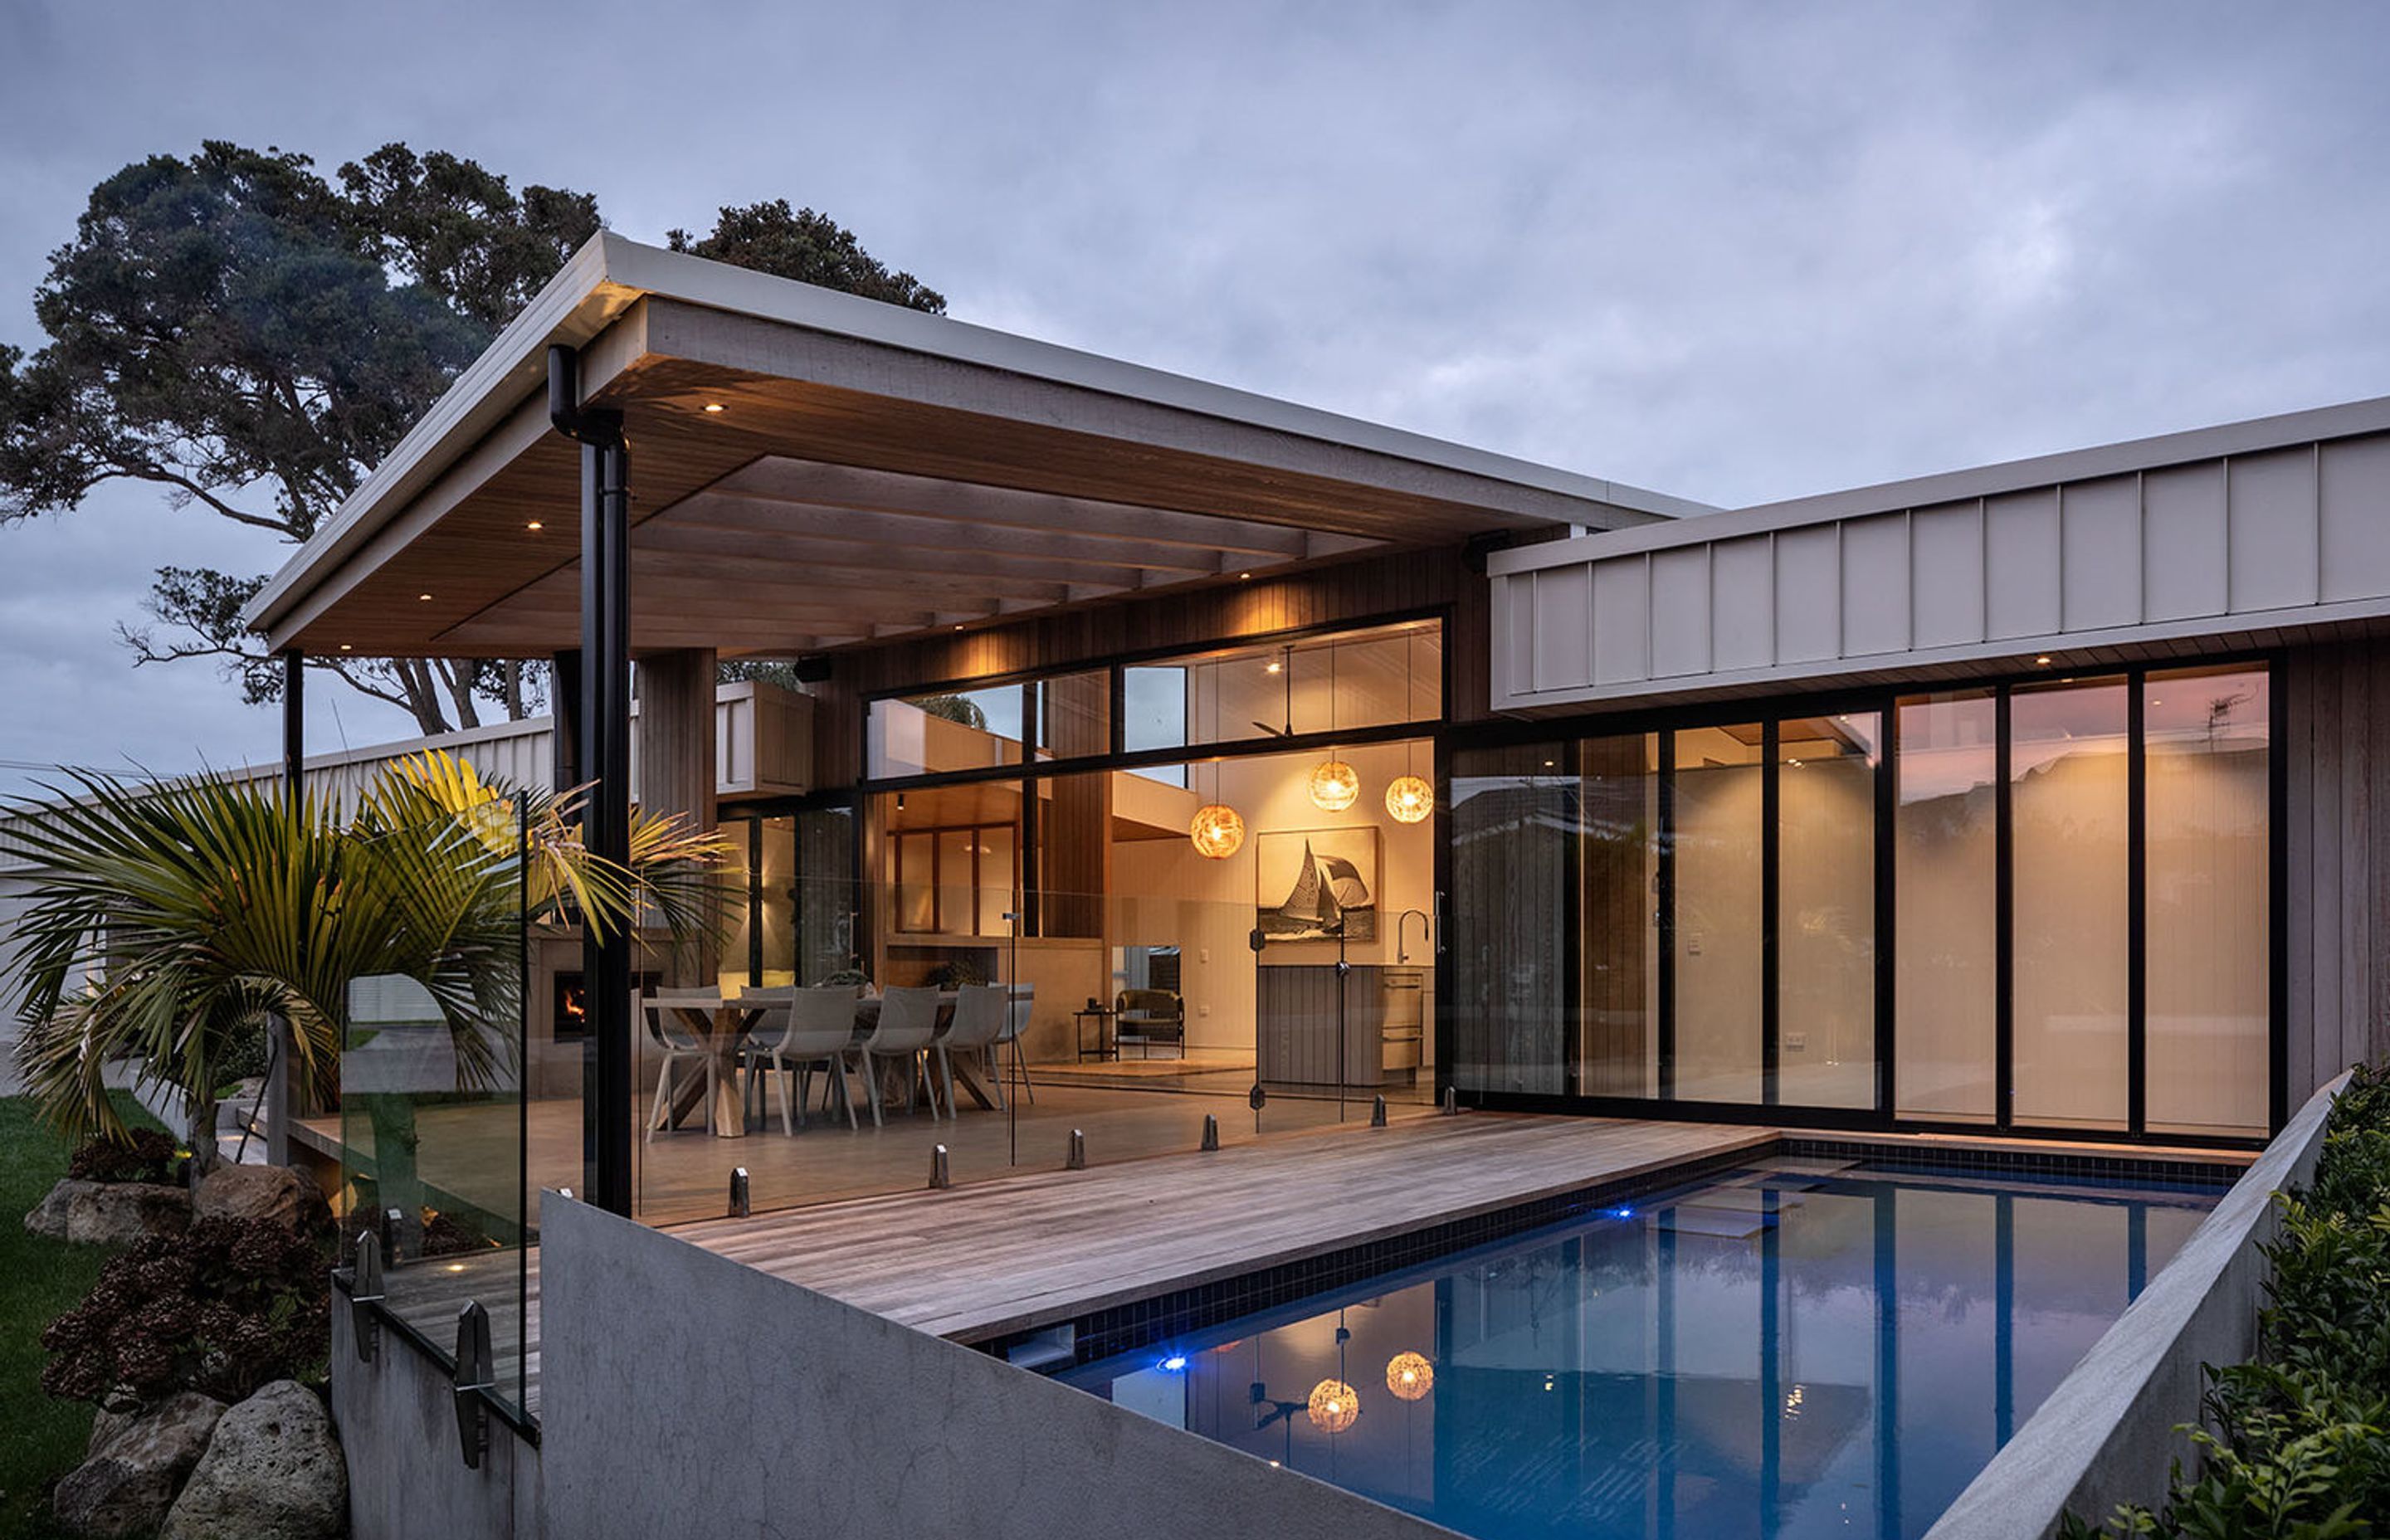 Next to the outdoor living area, the navy-tiled swimming pool is surrounded by decking. Two established pōhutukawa trees provide focal points at either end of the house.